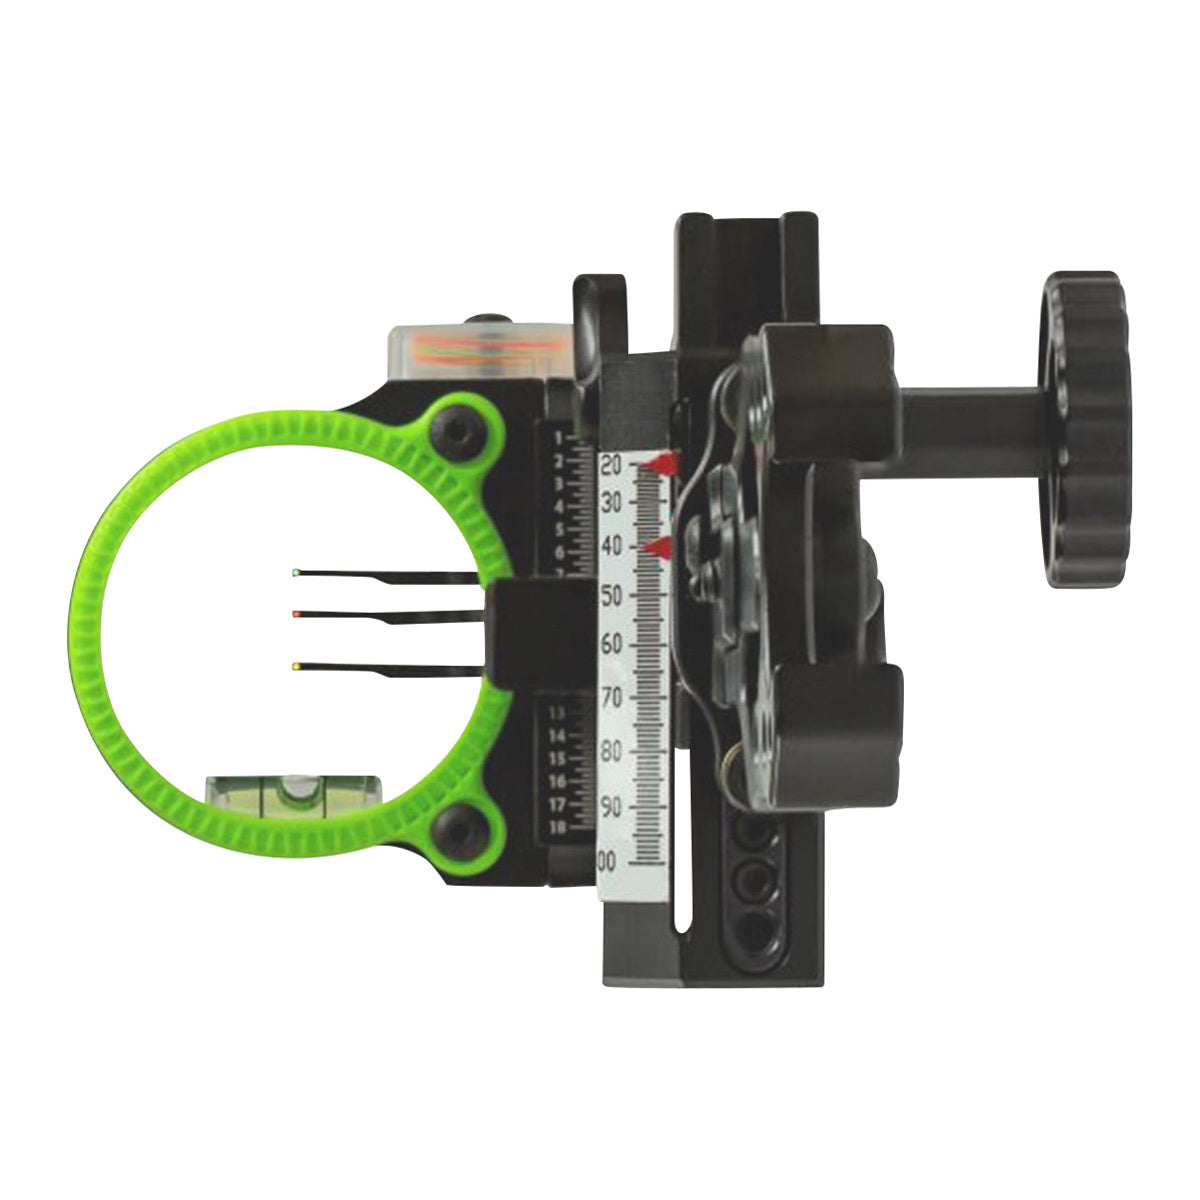 Black Gold Ascent Mountain Lite 3 Pin Bow Sight in Black Gold Ascent Mountain Lite 3 Pin Bow Sight by Black Gold | Archery - goHUNT Shop by GOHUNT | Black Gold - GOHUNT Shop